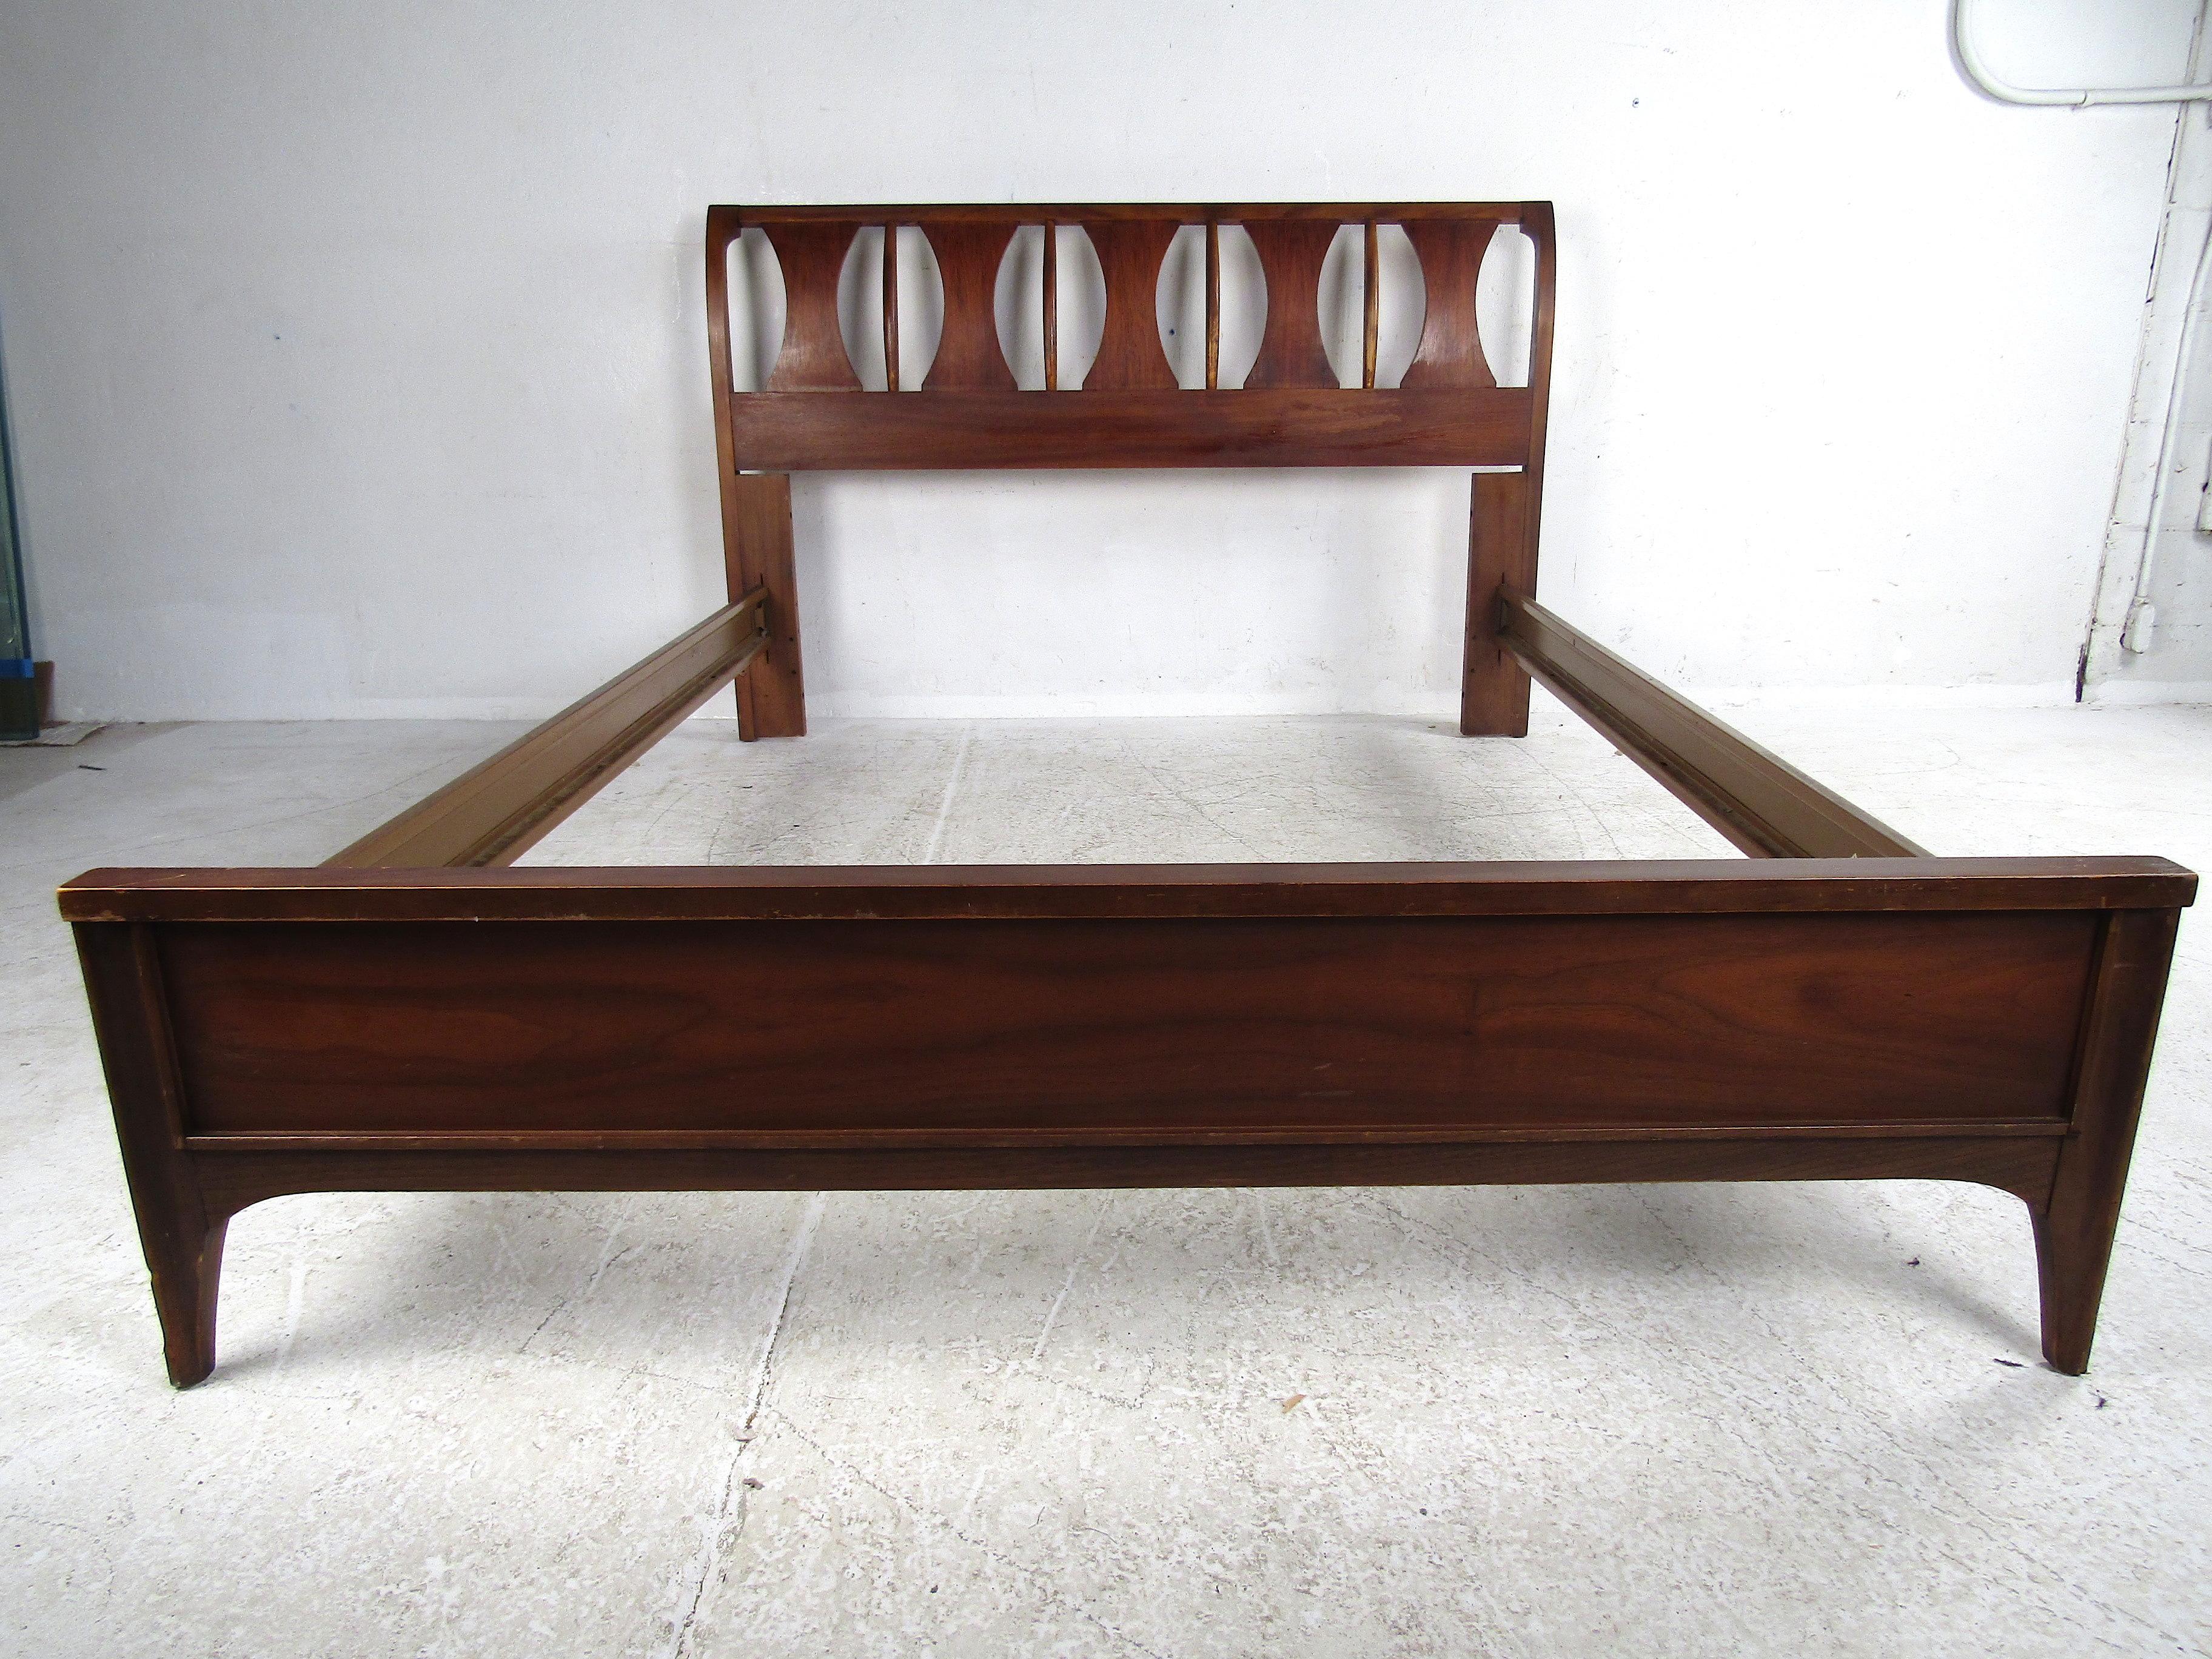 Great Mid-Century Modern bedframe. Stylish accents spanning the headboard along with a low-profile footboard give this piece a nice look. Striking mixture of walnut and rosewood, and metal rails with a mock wood-grain pattern. Sure to be a great